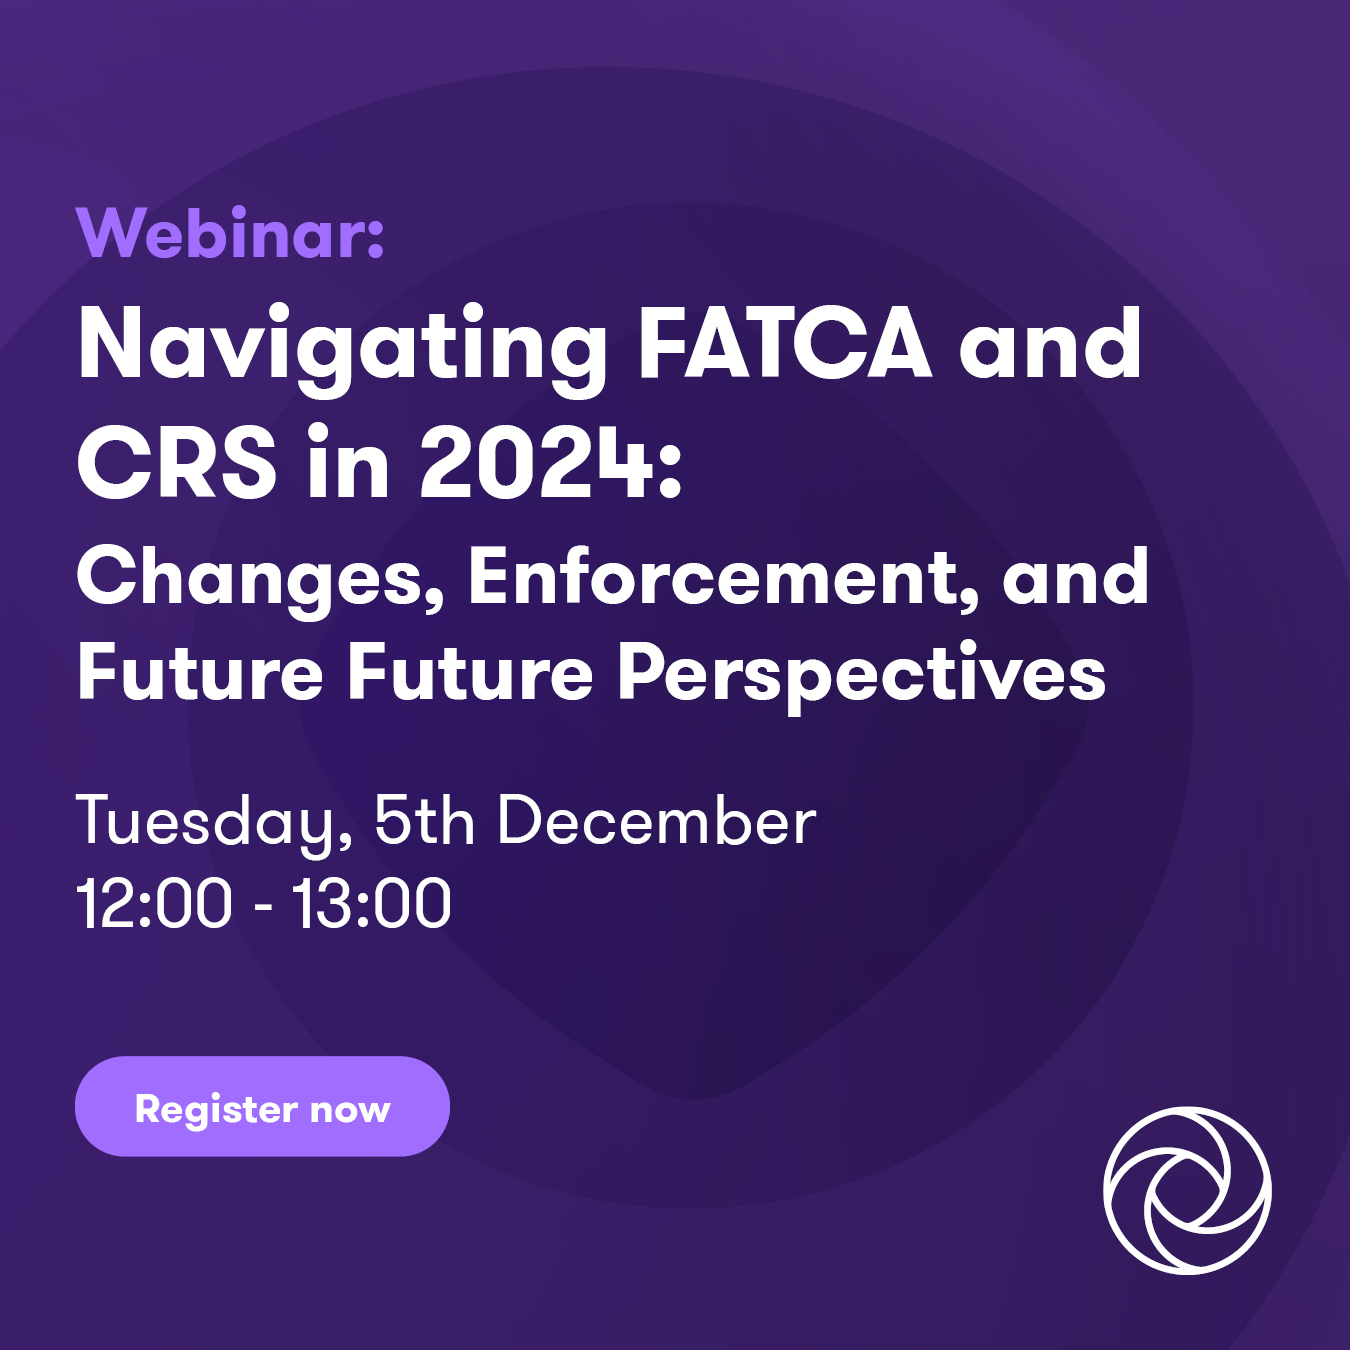 Navigating FATCA and CRS in 2024 Changes, Enforcement, and Future